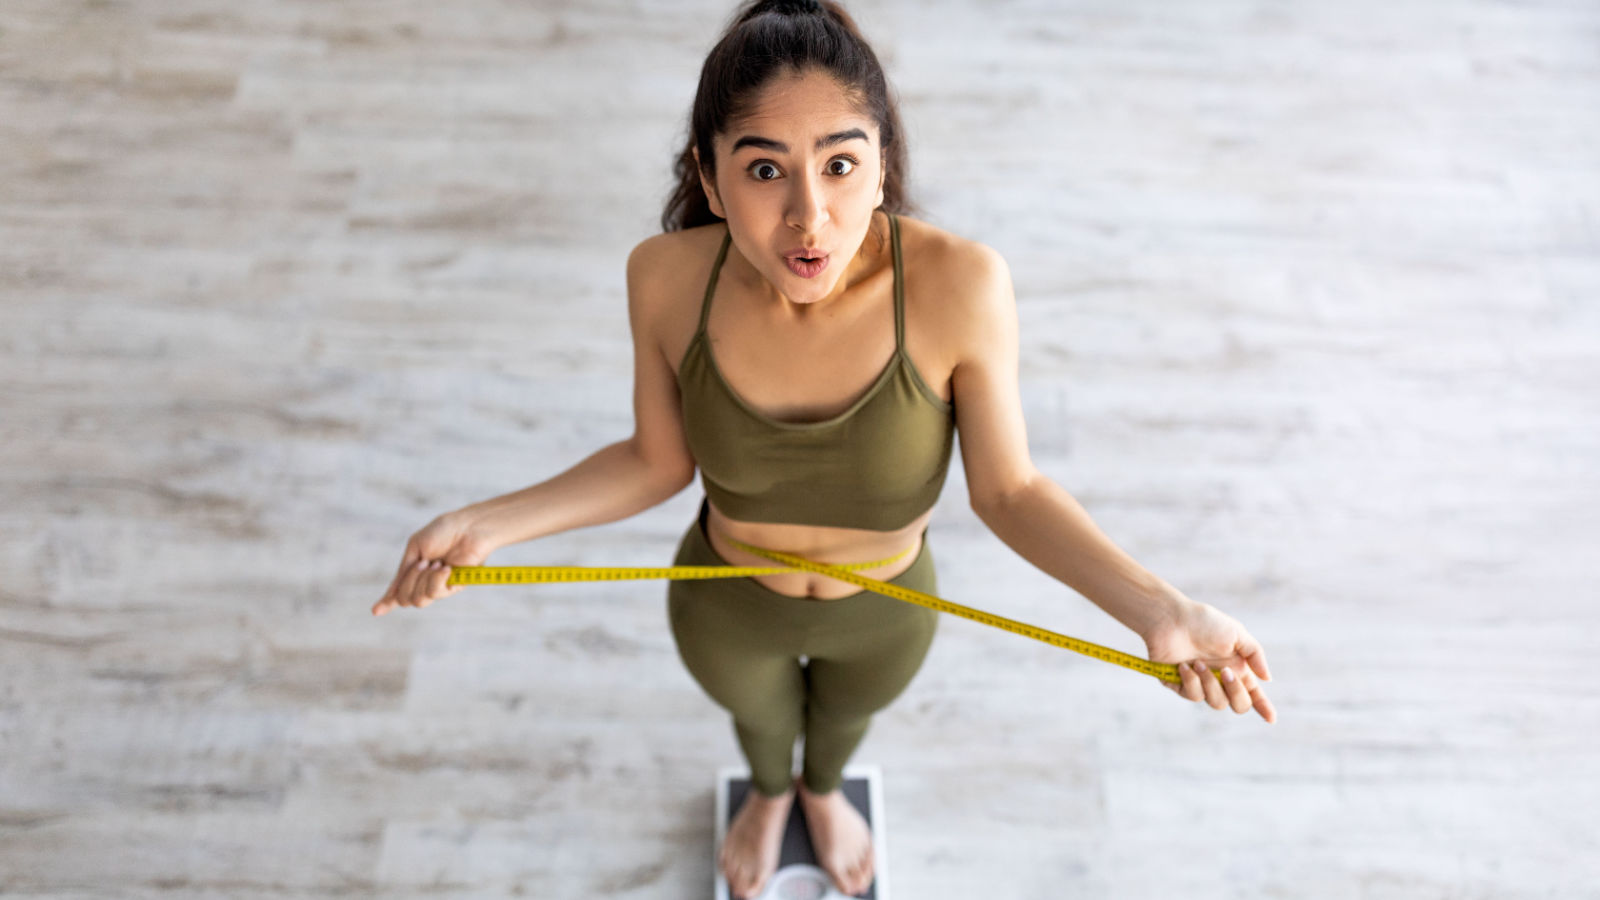 image credit: prostock-studio/shutterstock <p><span>You’re eating and exercising the same, but the scale tells a different story. This unexplained weight gain, particularly around the abdomen, can be frustrating. It’s a common symptom of hormonal changes. Understanding this can help in finding the right balance in diet and exercise.</span></p>